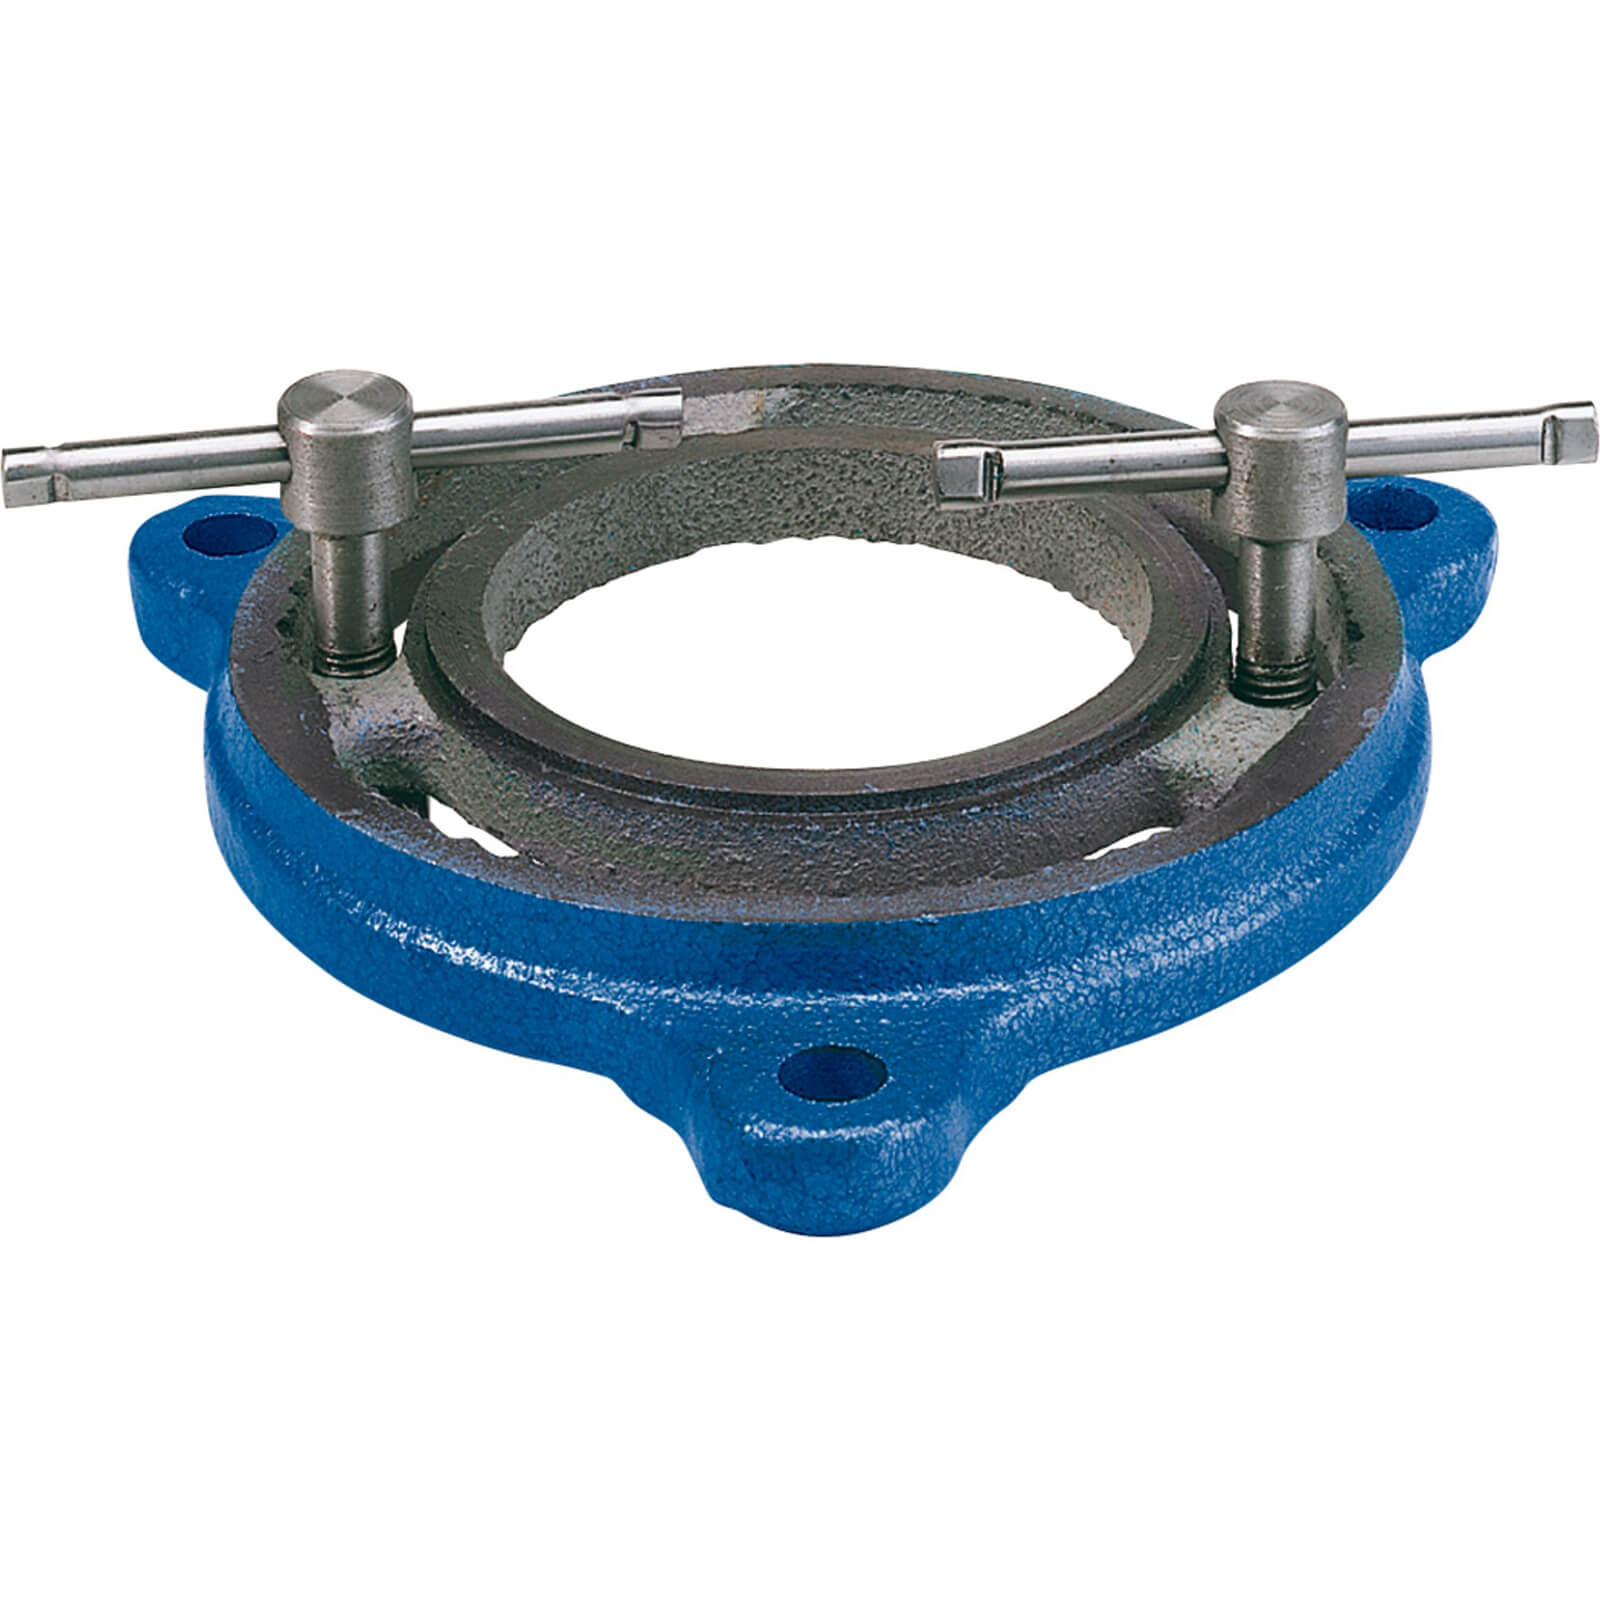 Draper Swivel Base for 45783 Engineers Bench Vice